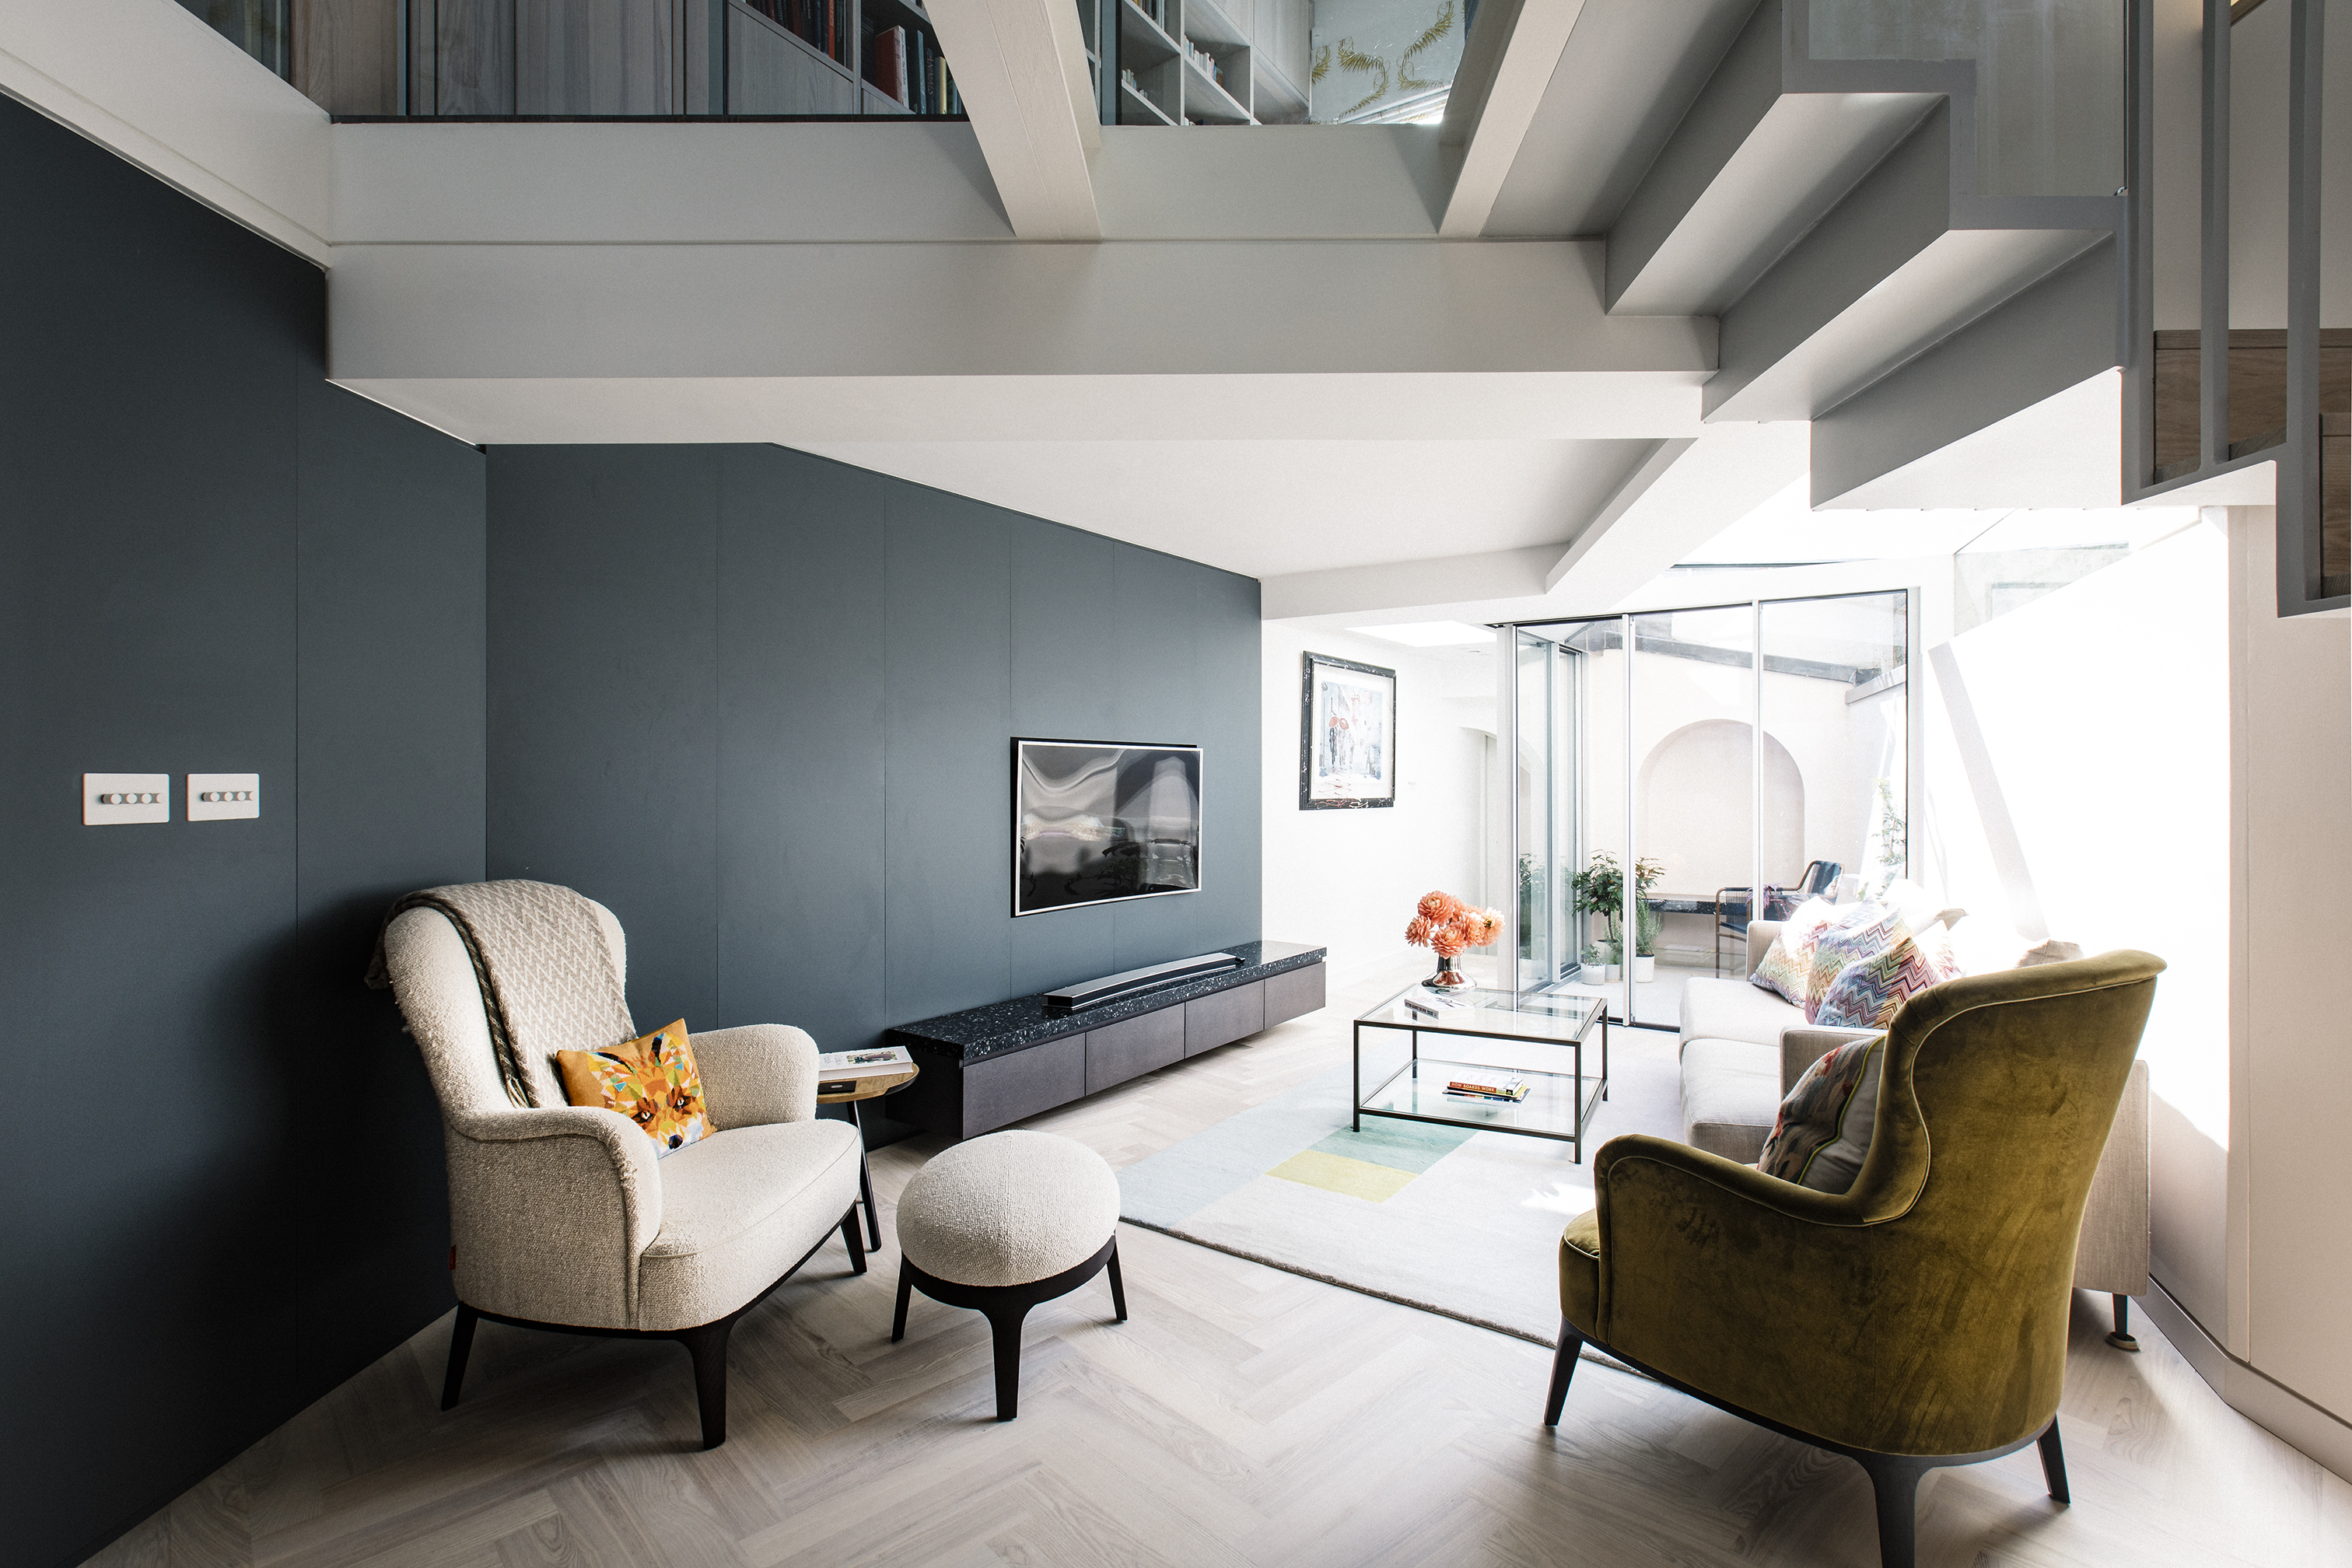 The curving petrol blue wall leads past modern armchairs from the TV room to the walled garden